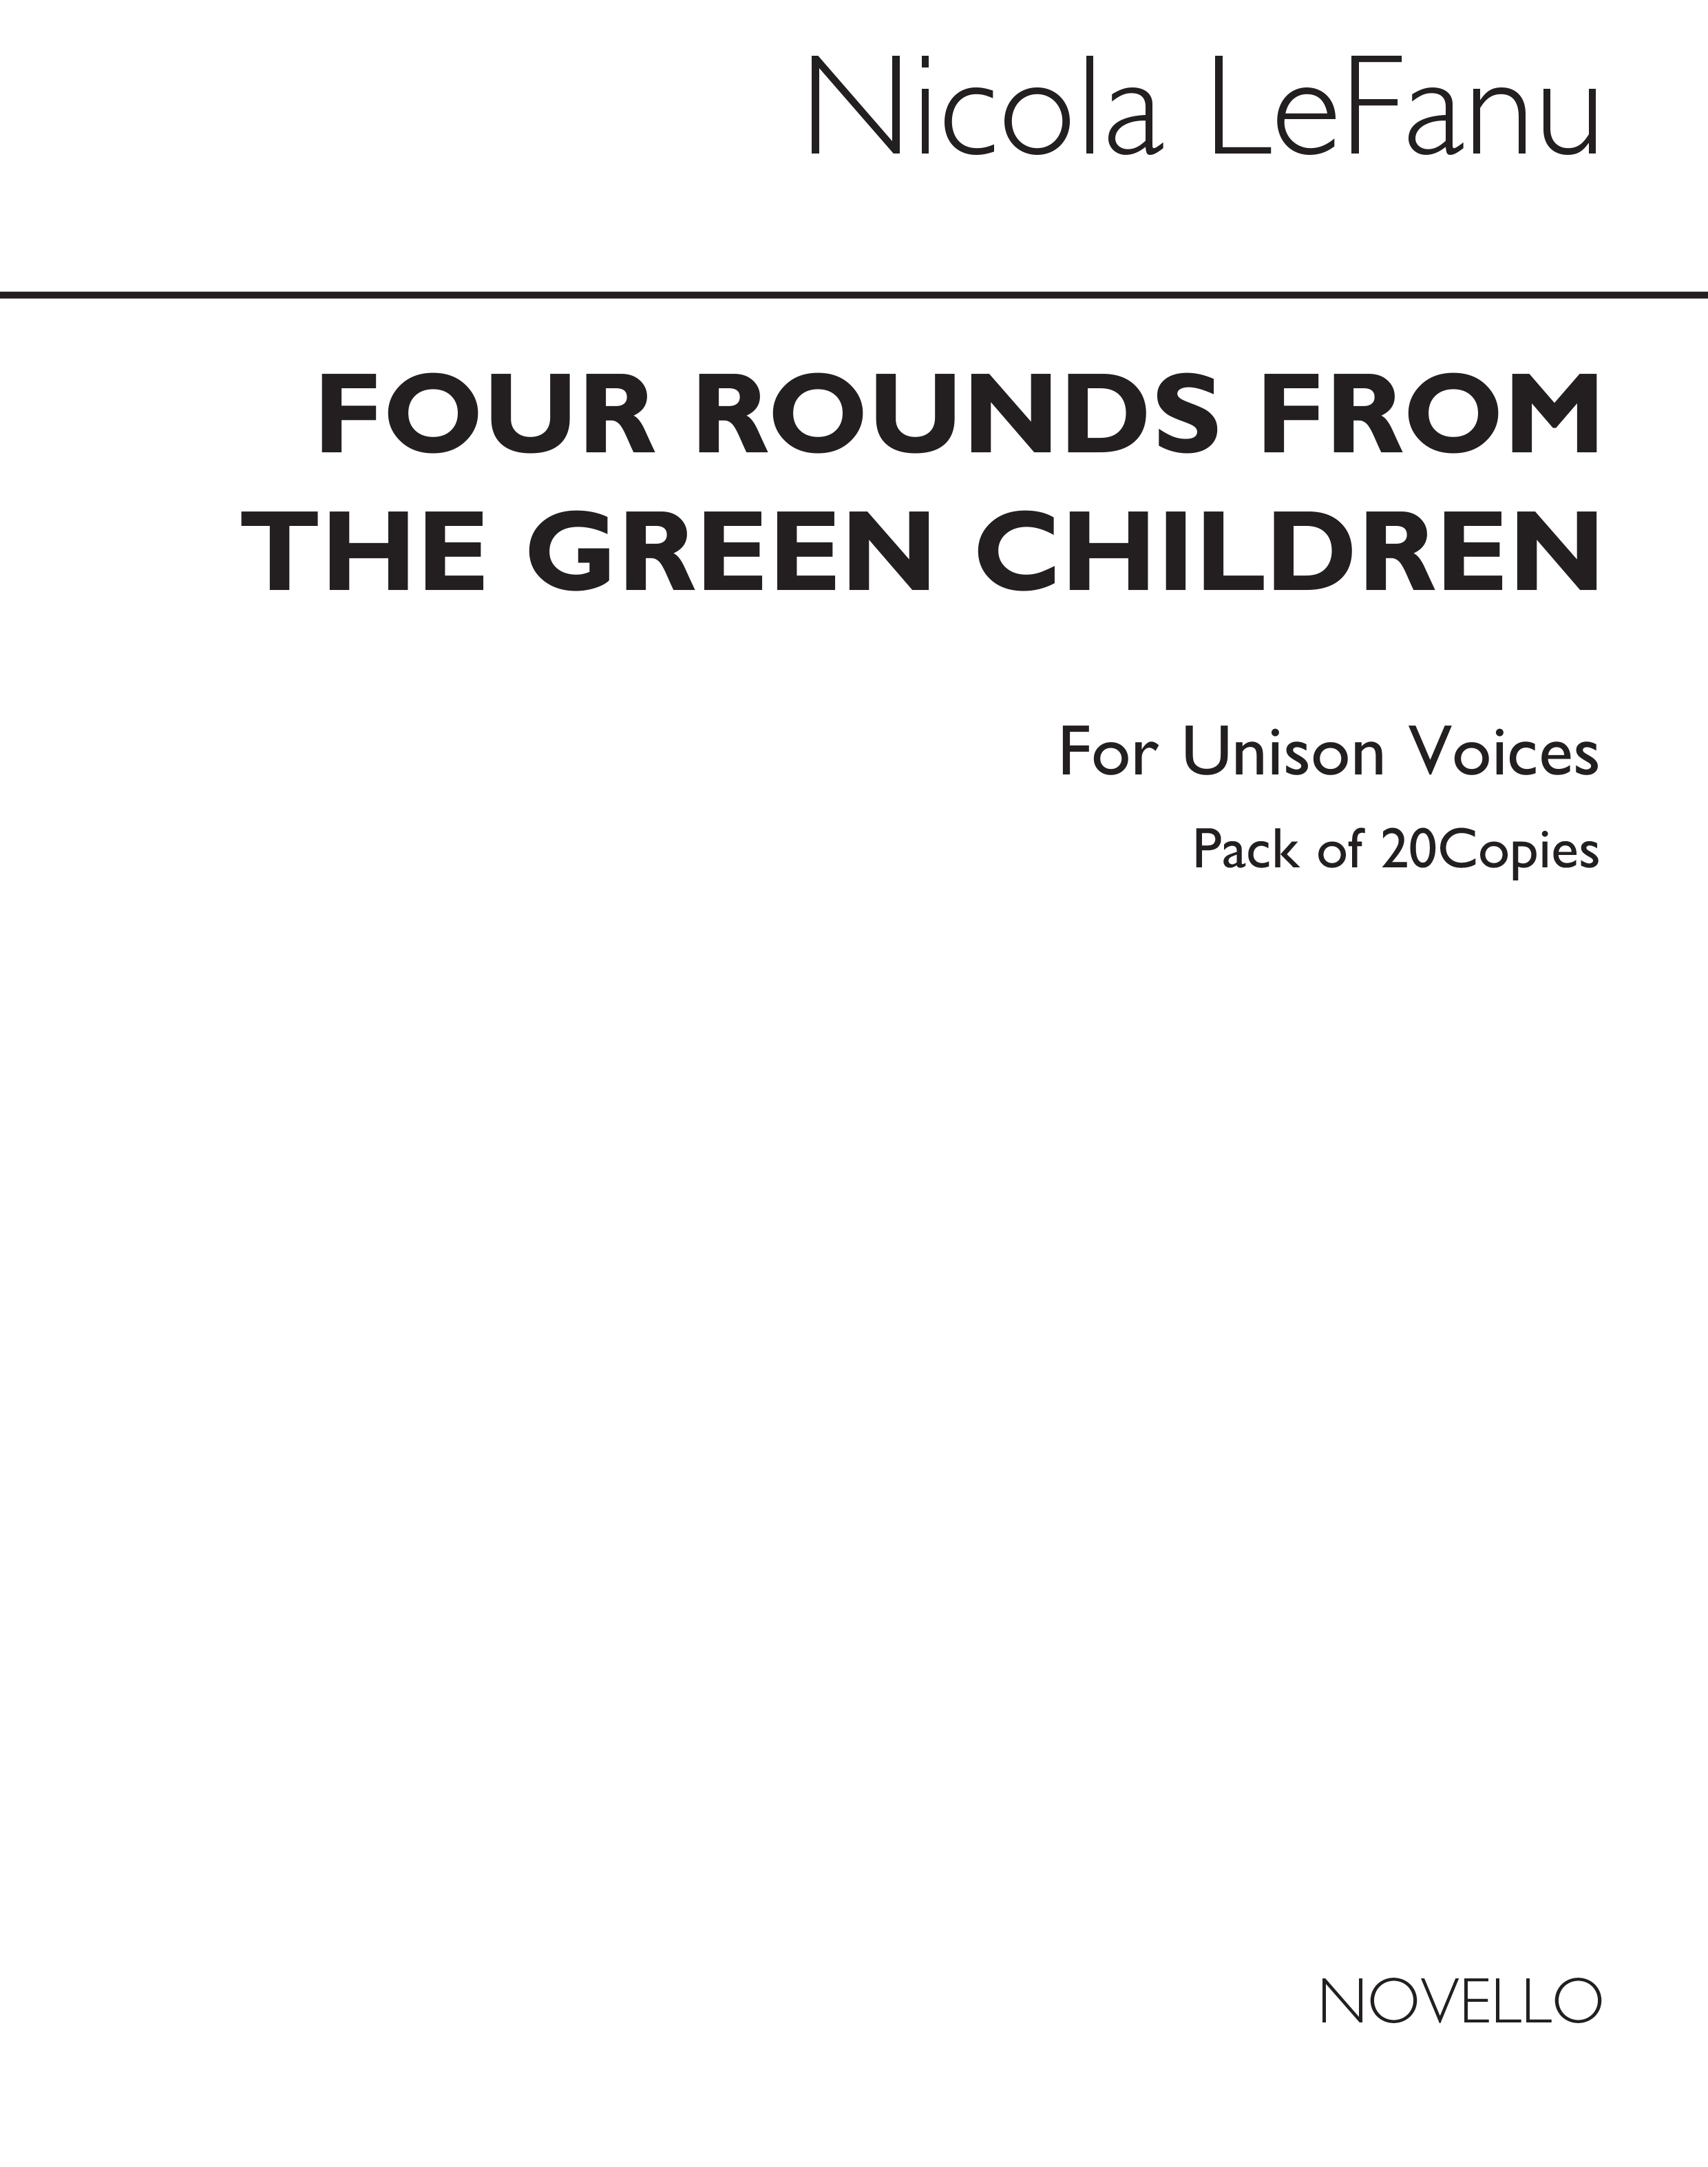 Lefanu: Four Rounds From 'The Green Children' for Unison voices (20 Copies)